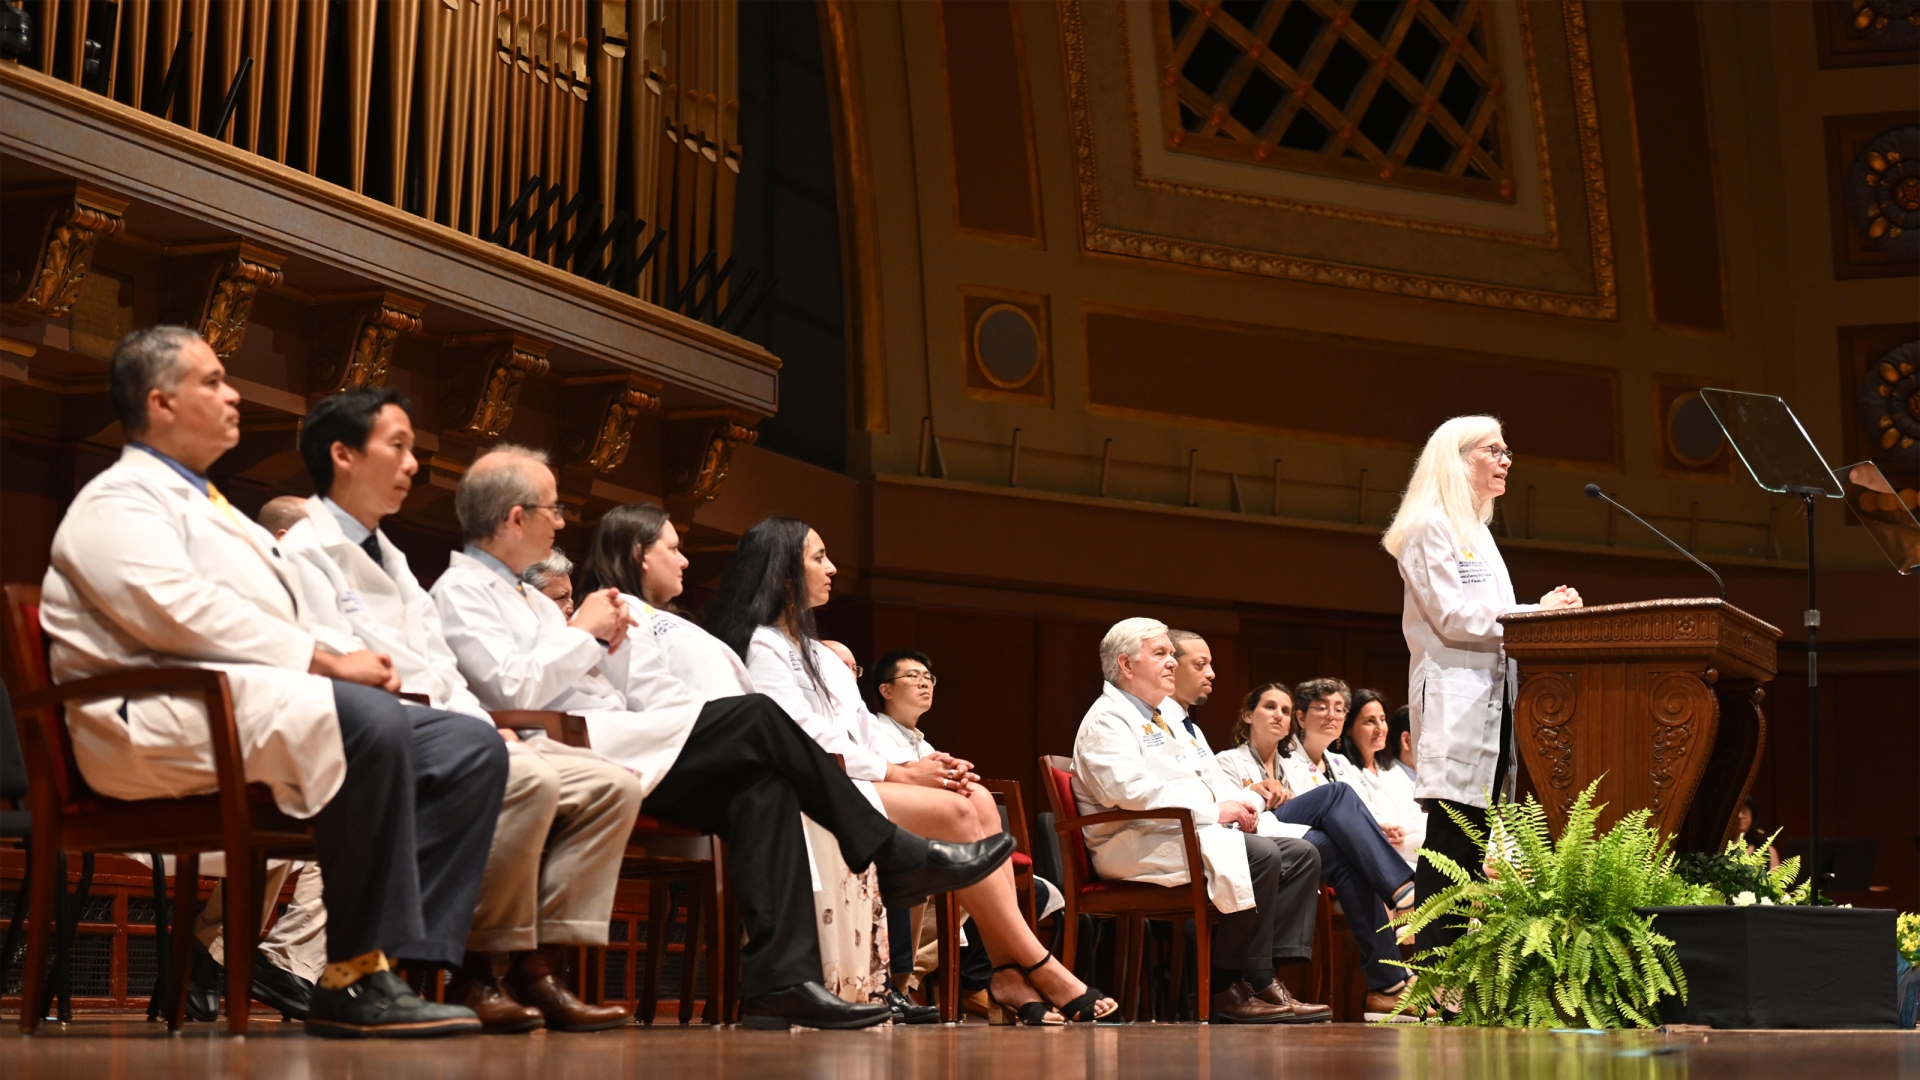 Michigan Medicine leaders seated on the stage at Hill Auditorium